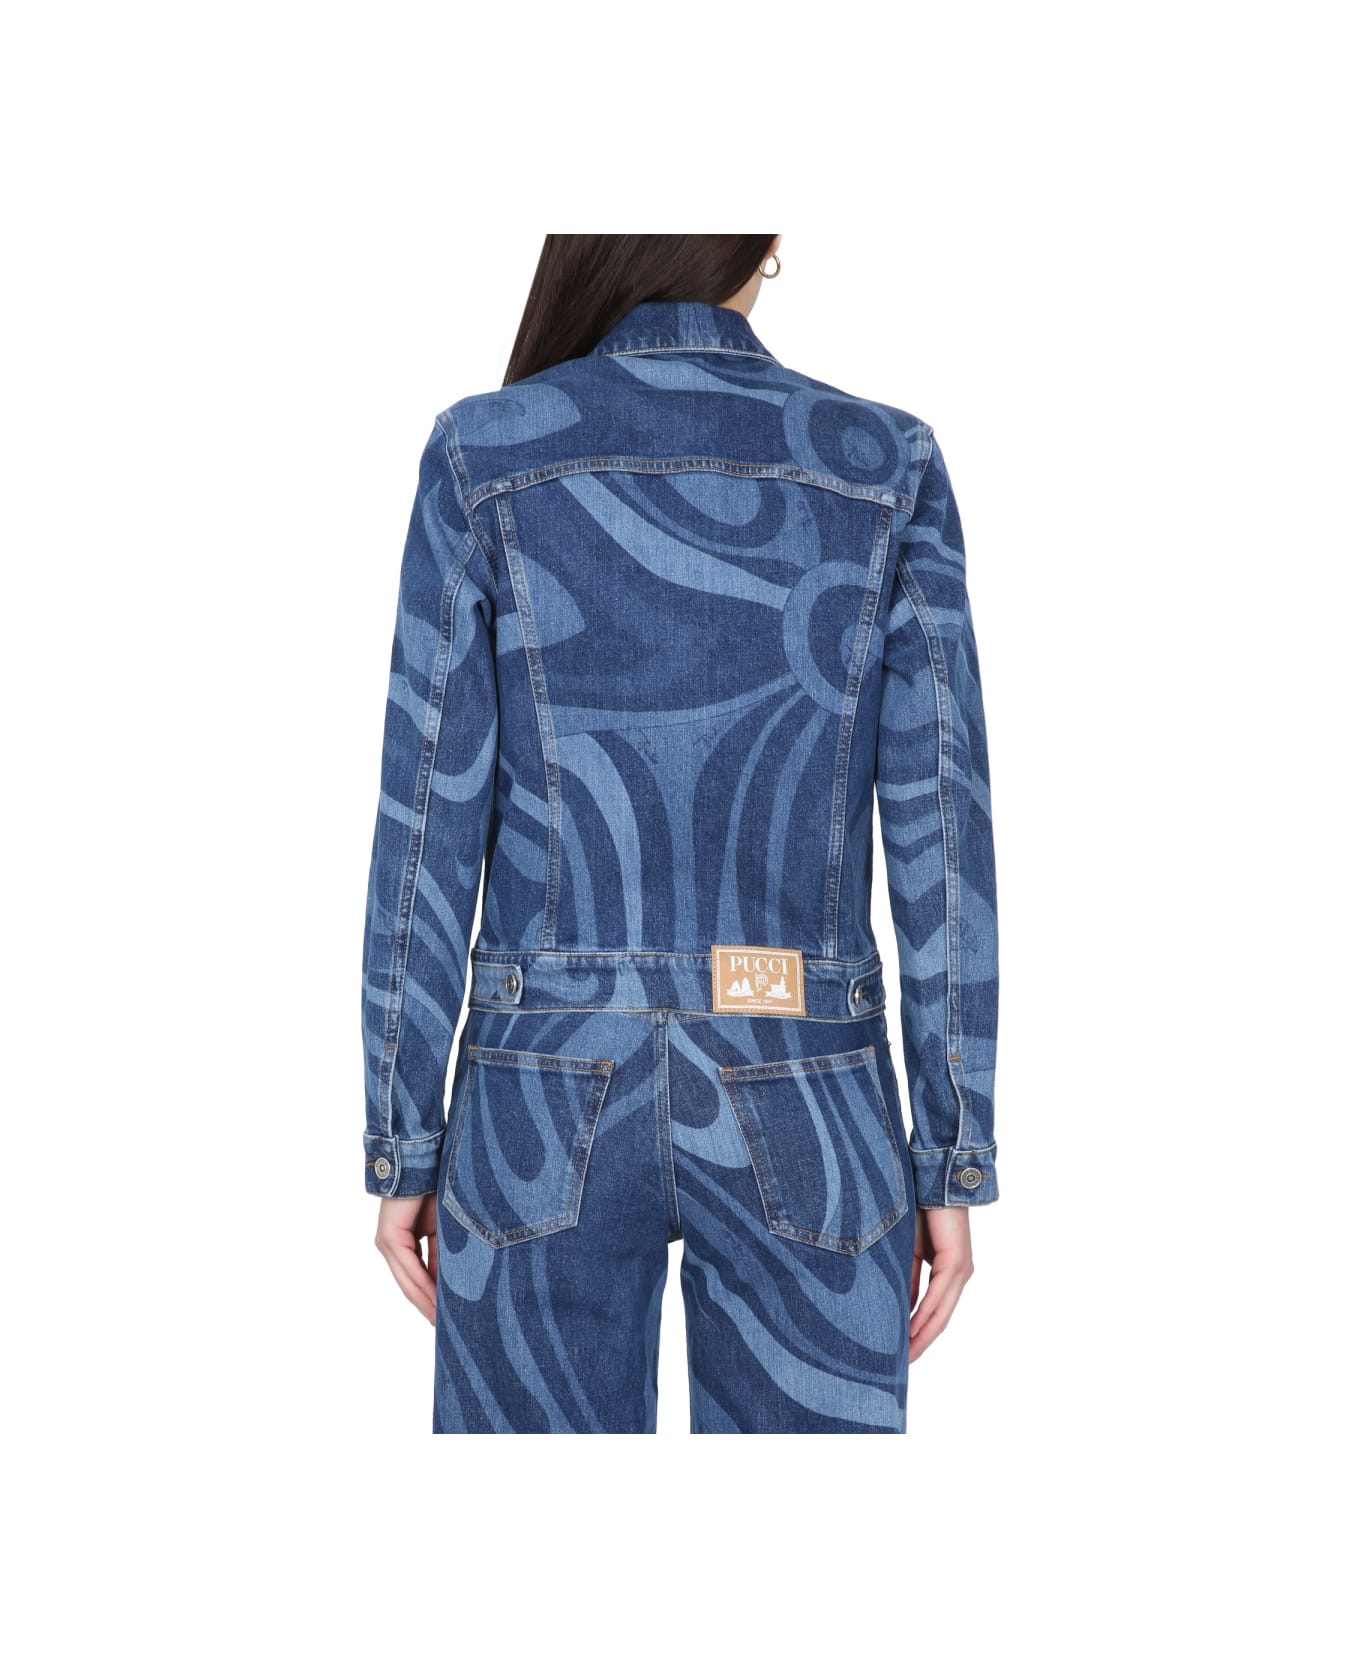 Pucci Marble Print Jacket - BLUE